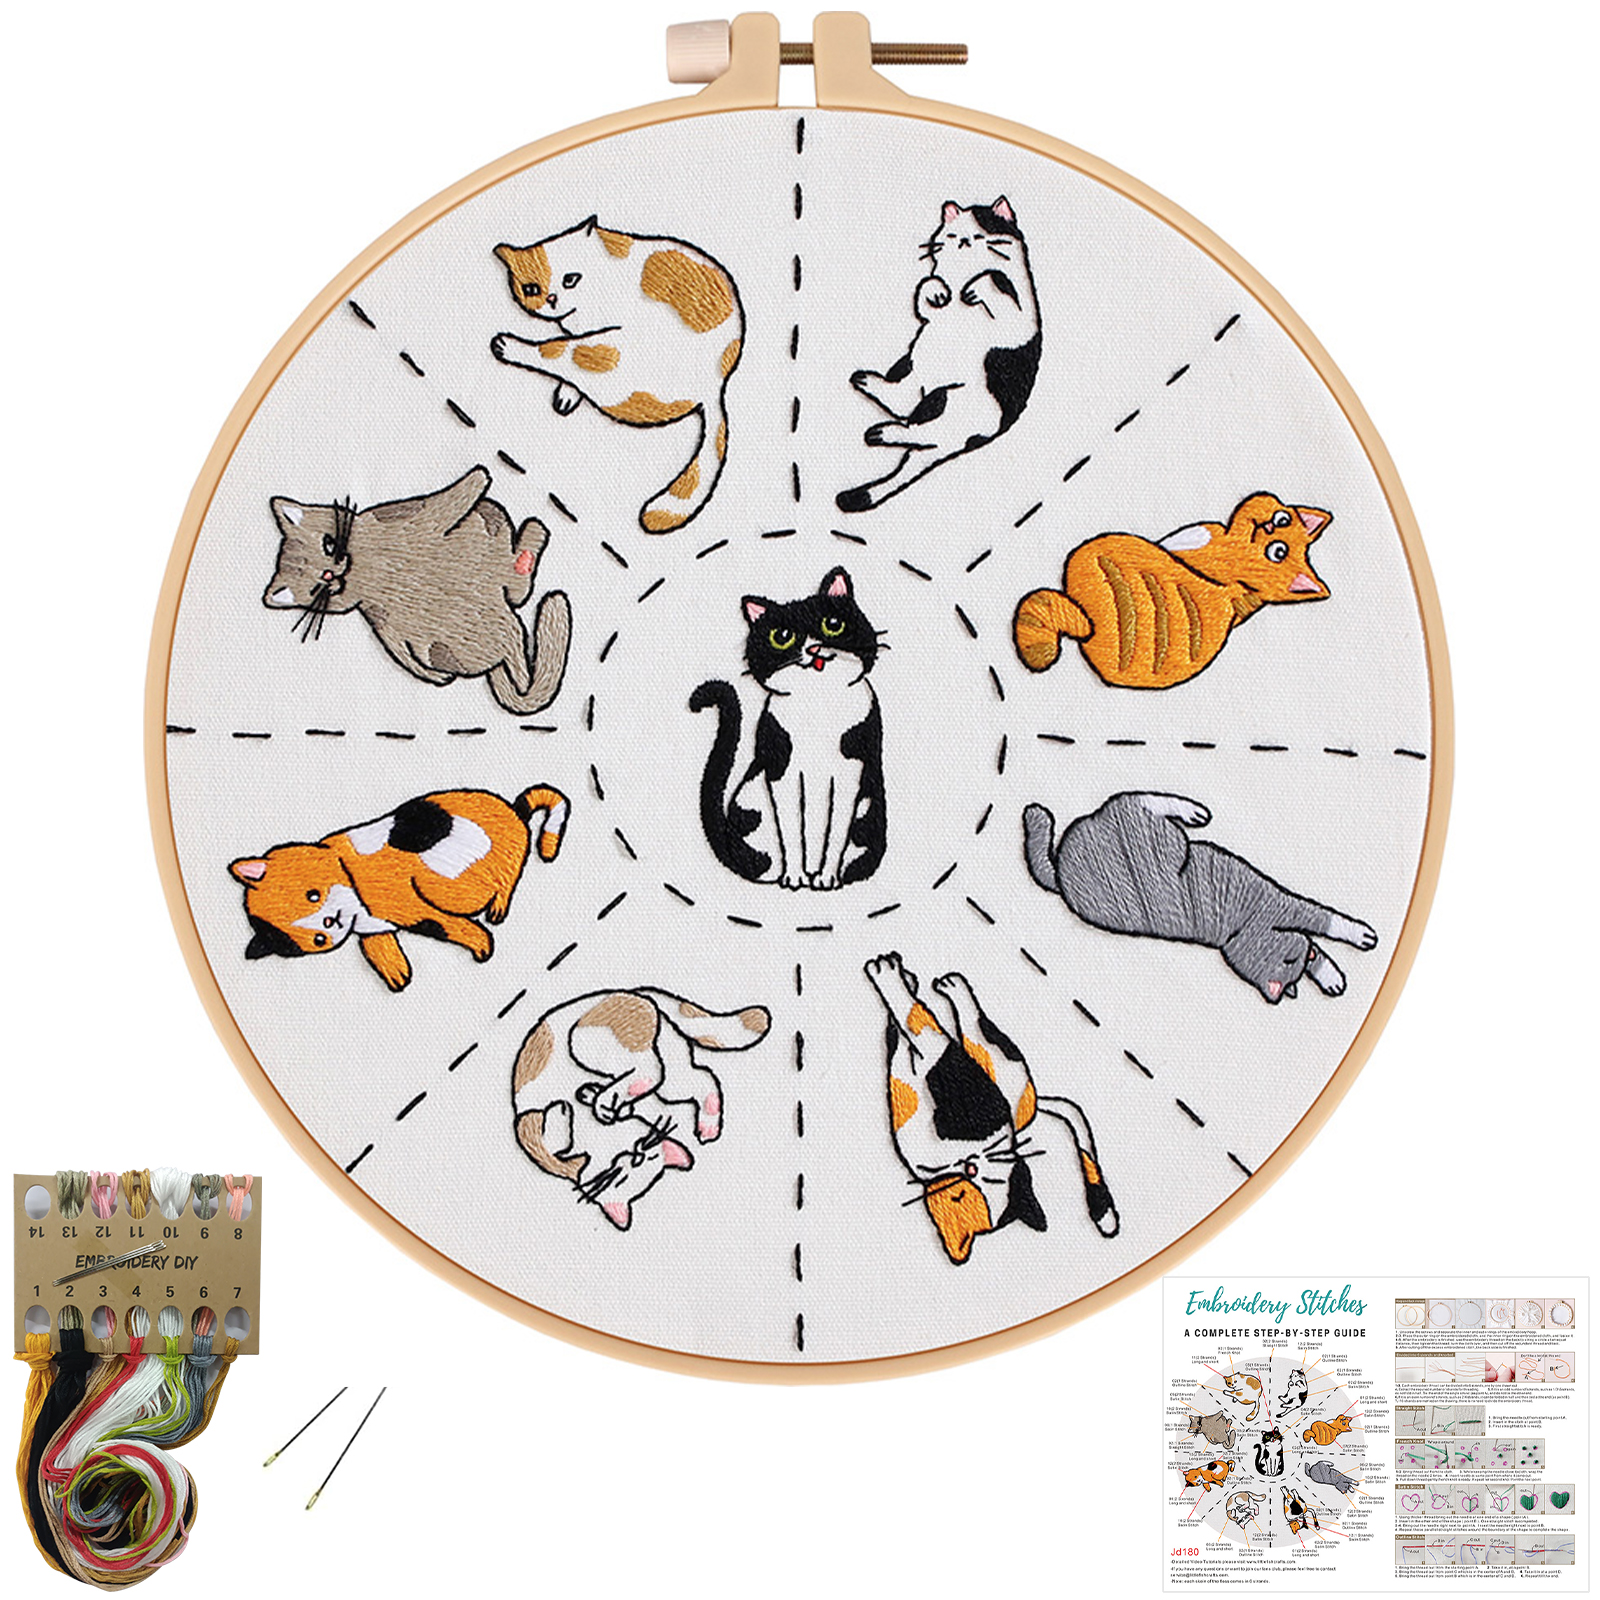 Embroidery Starter Kit Cross stitch kit for Adult Beginner - Cute Cats pattern